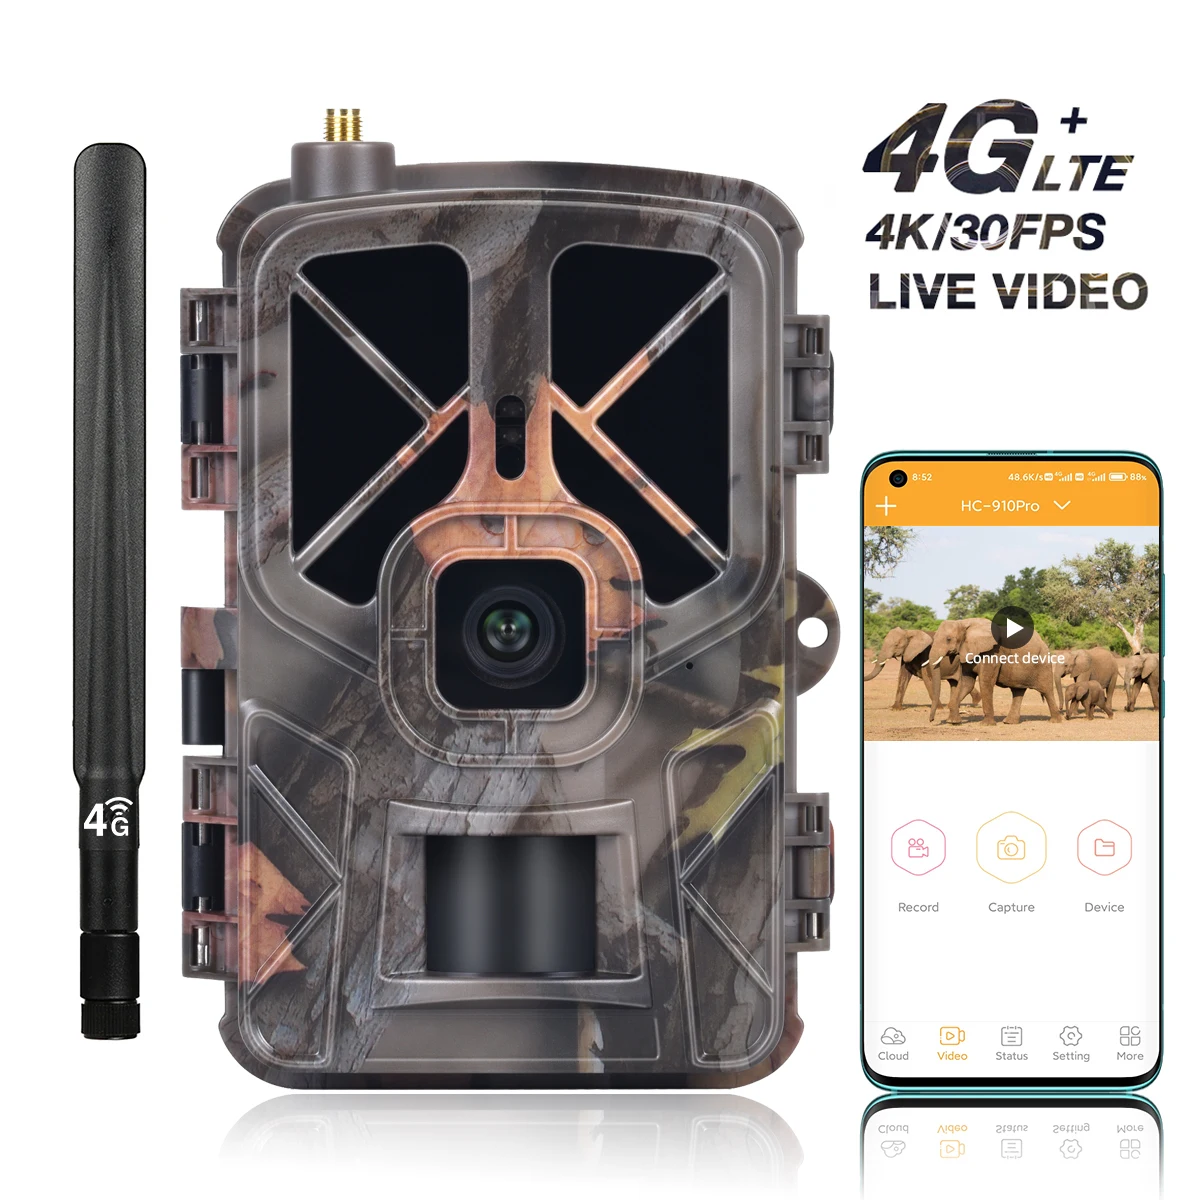 

Outdoor 4G Cellular Night Vision Trail Game Camera 36MP 4K SIM Card Sends Pictures to Cell Phone,2.0"LCD Wildlife Monitoring